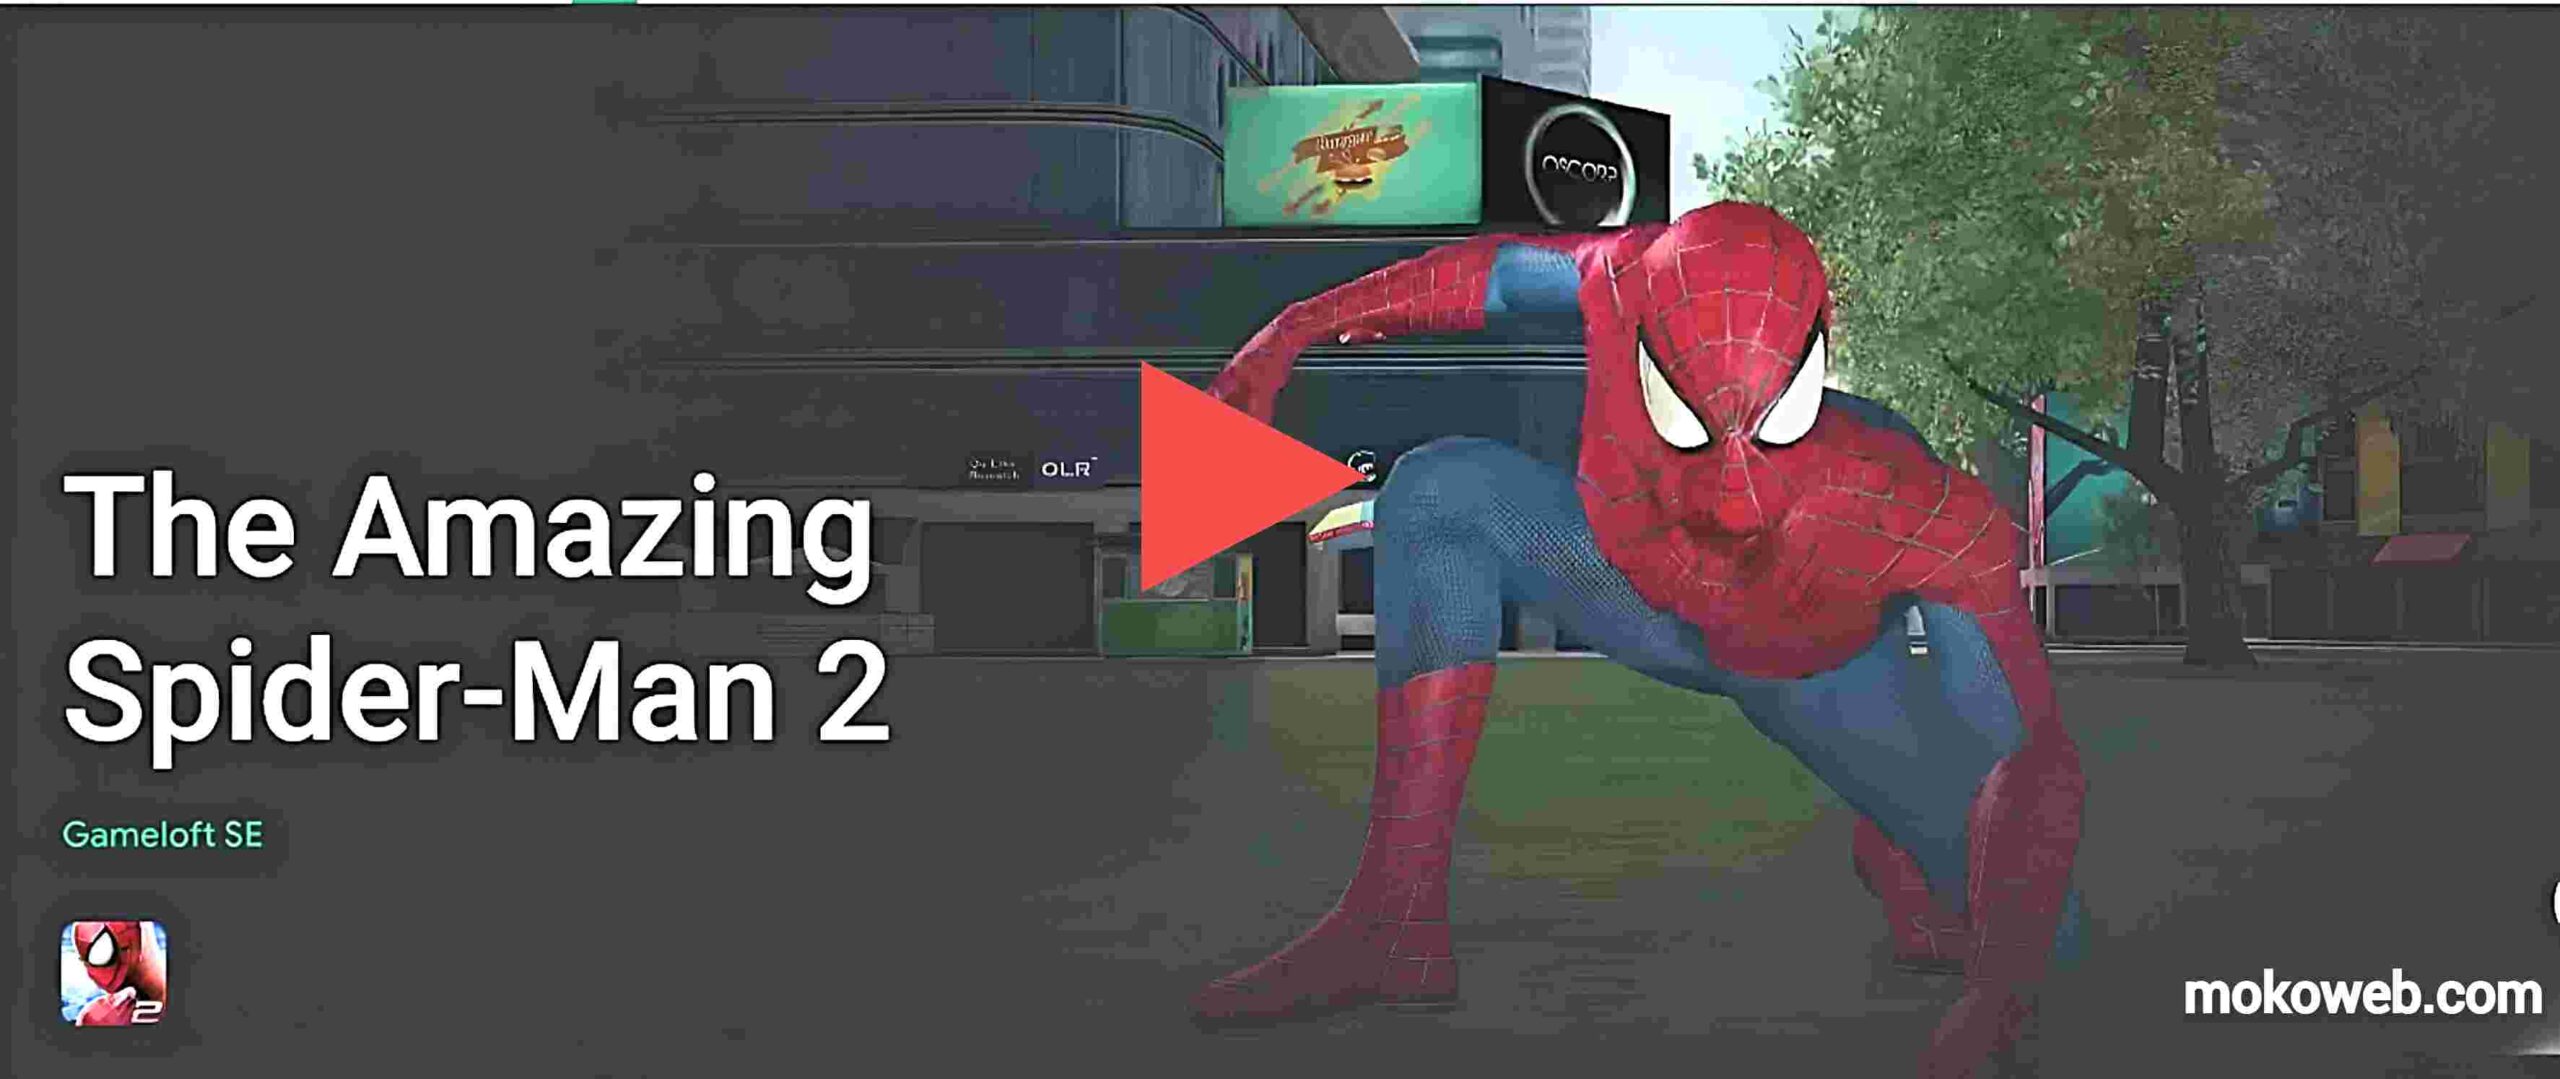 Download The amazing Spider-Man APK 1.2.8d for Android 